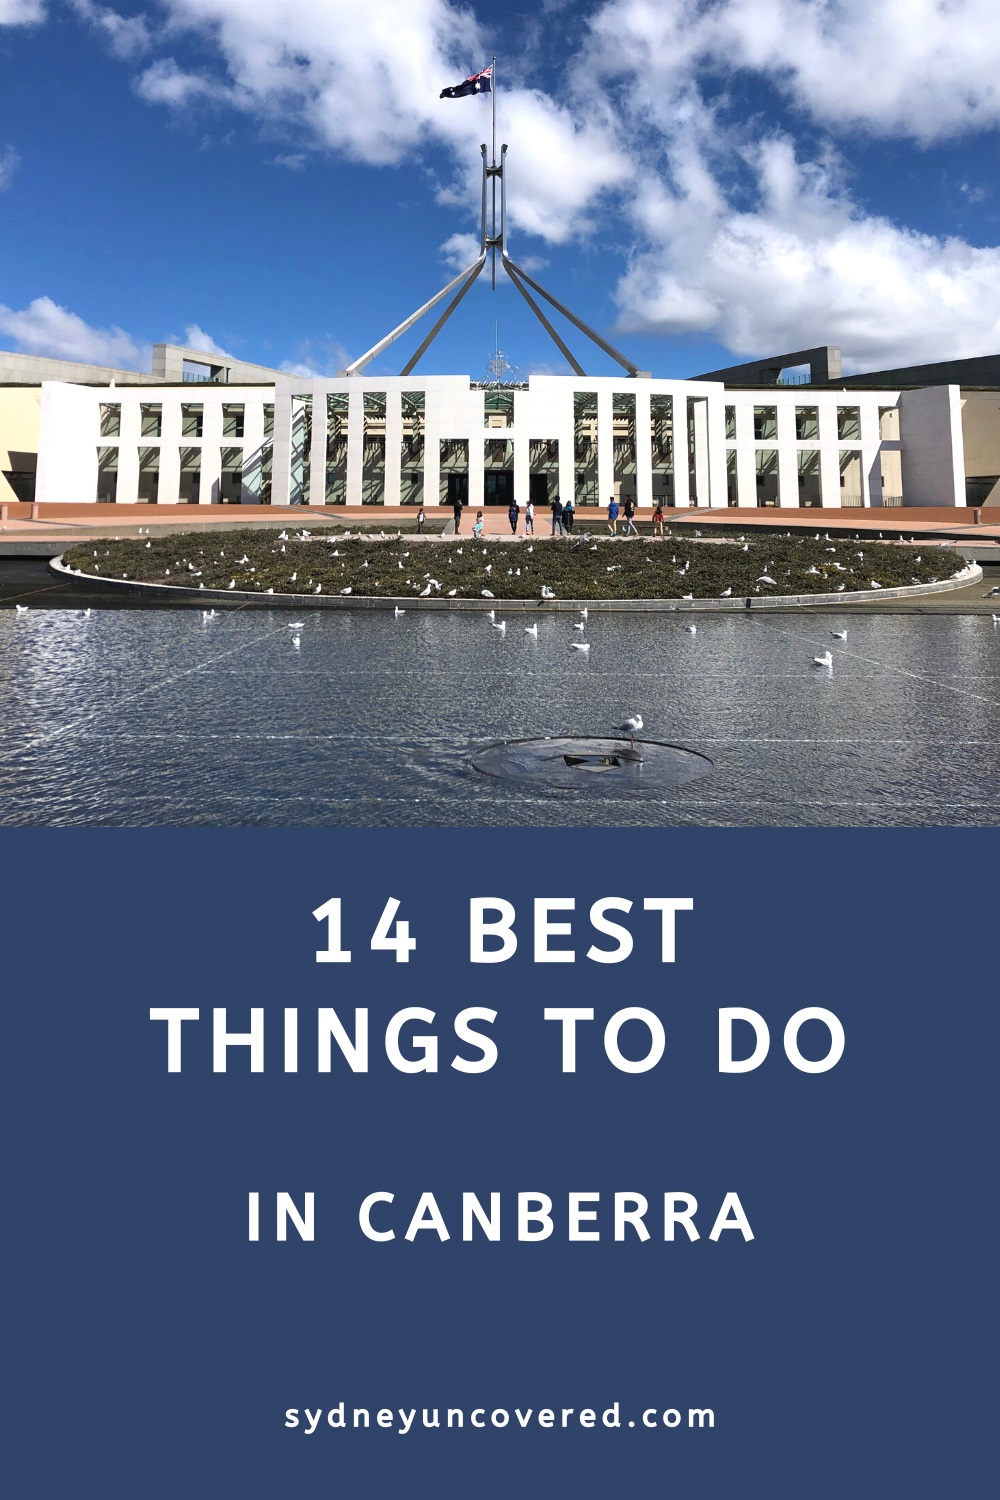 14 Best things to do in Canberra and surrounds